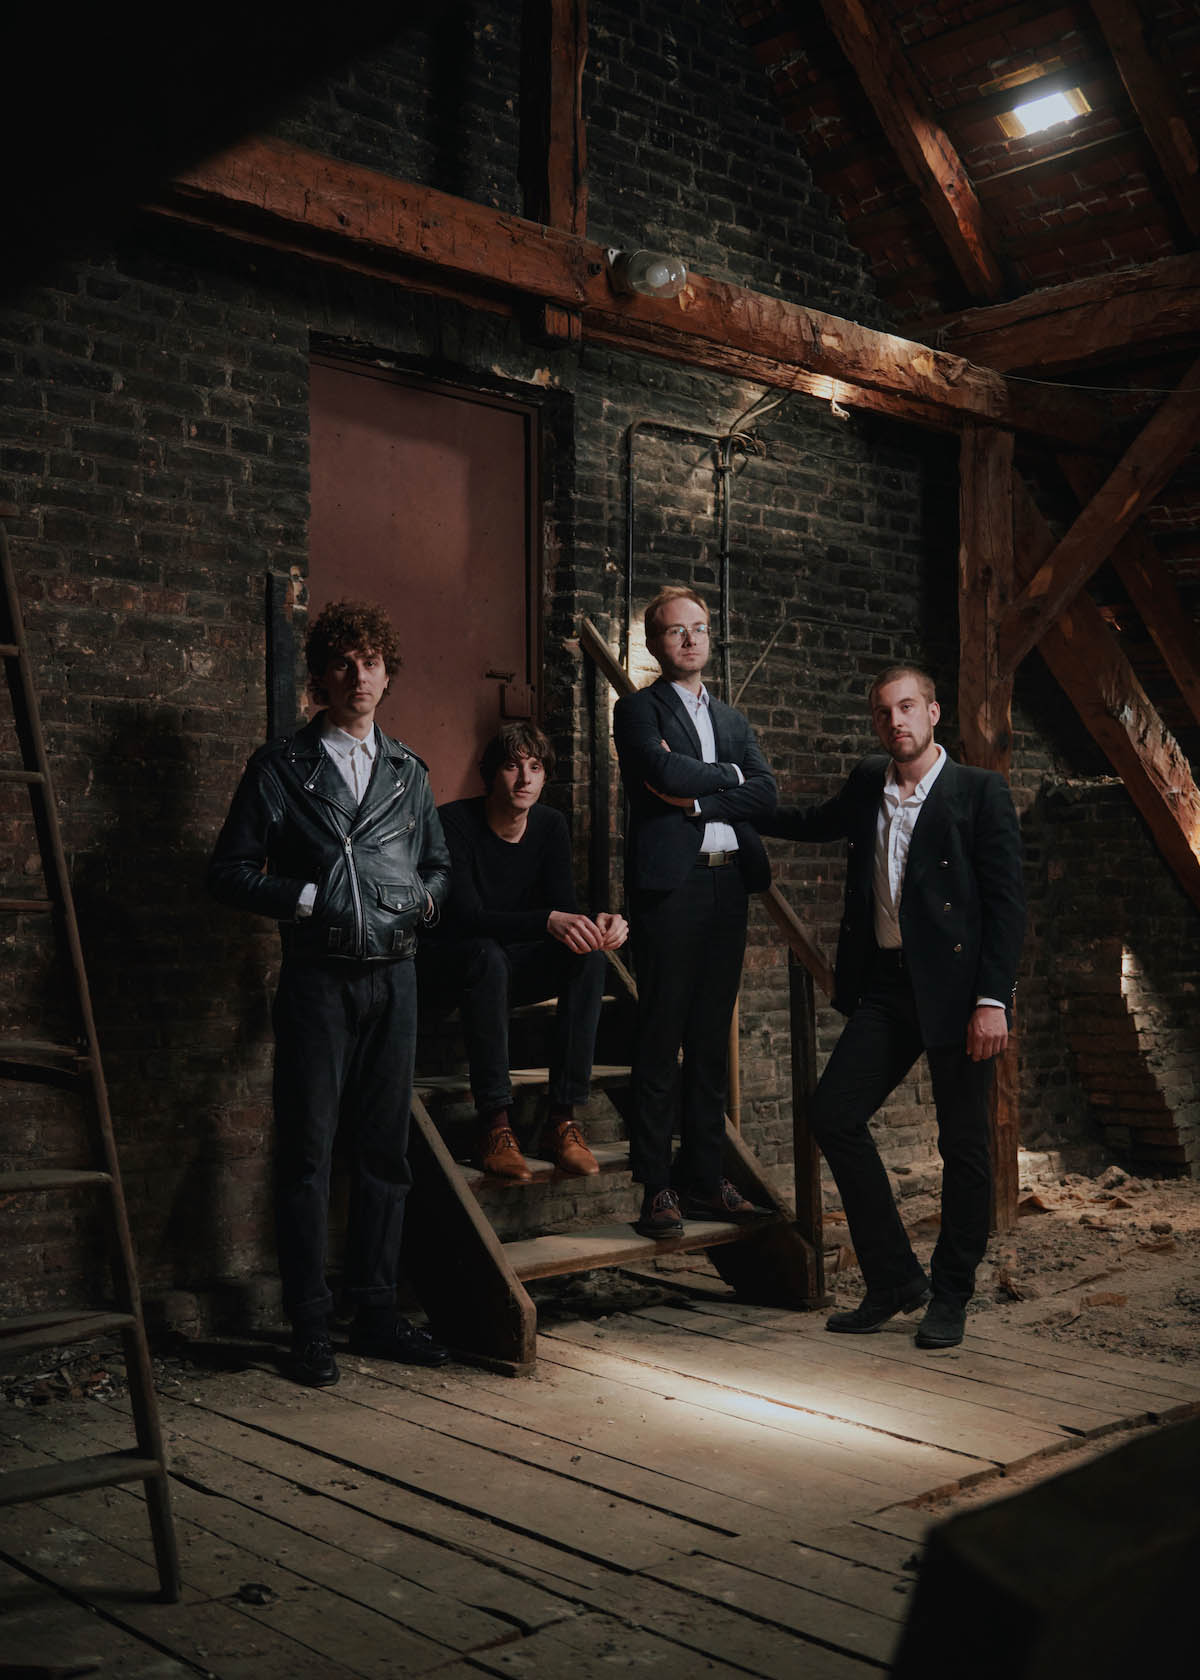 Four men look into the camera, three are standing up and around a four-step staircase in an attic-like environment, the fourth is sitting on this staircase. All of them are wearing black clothes.